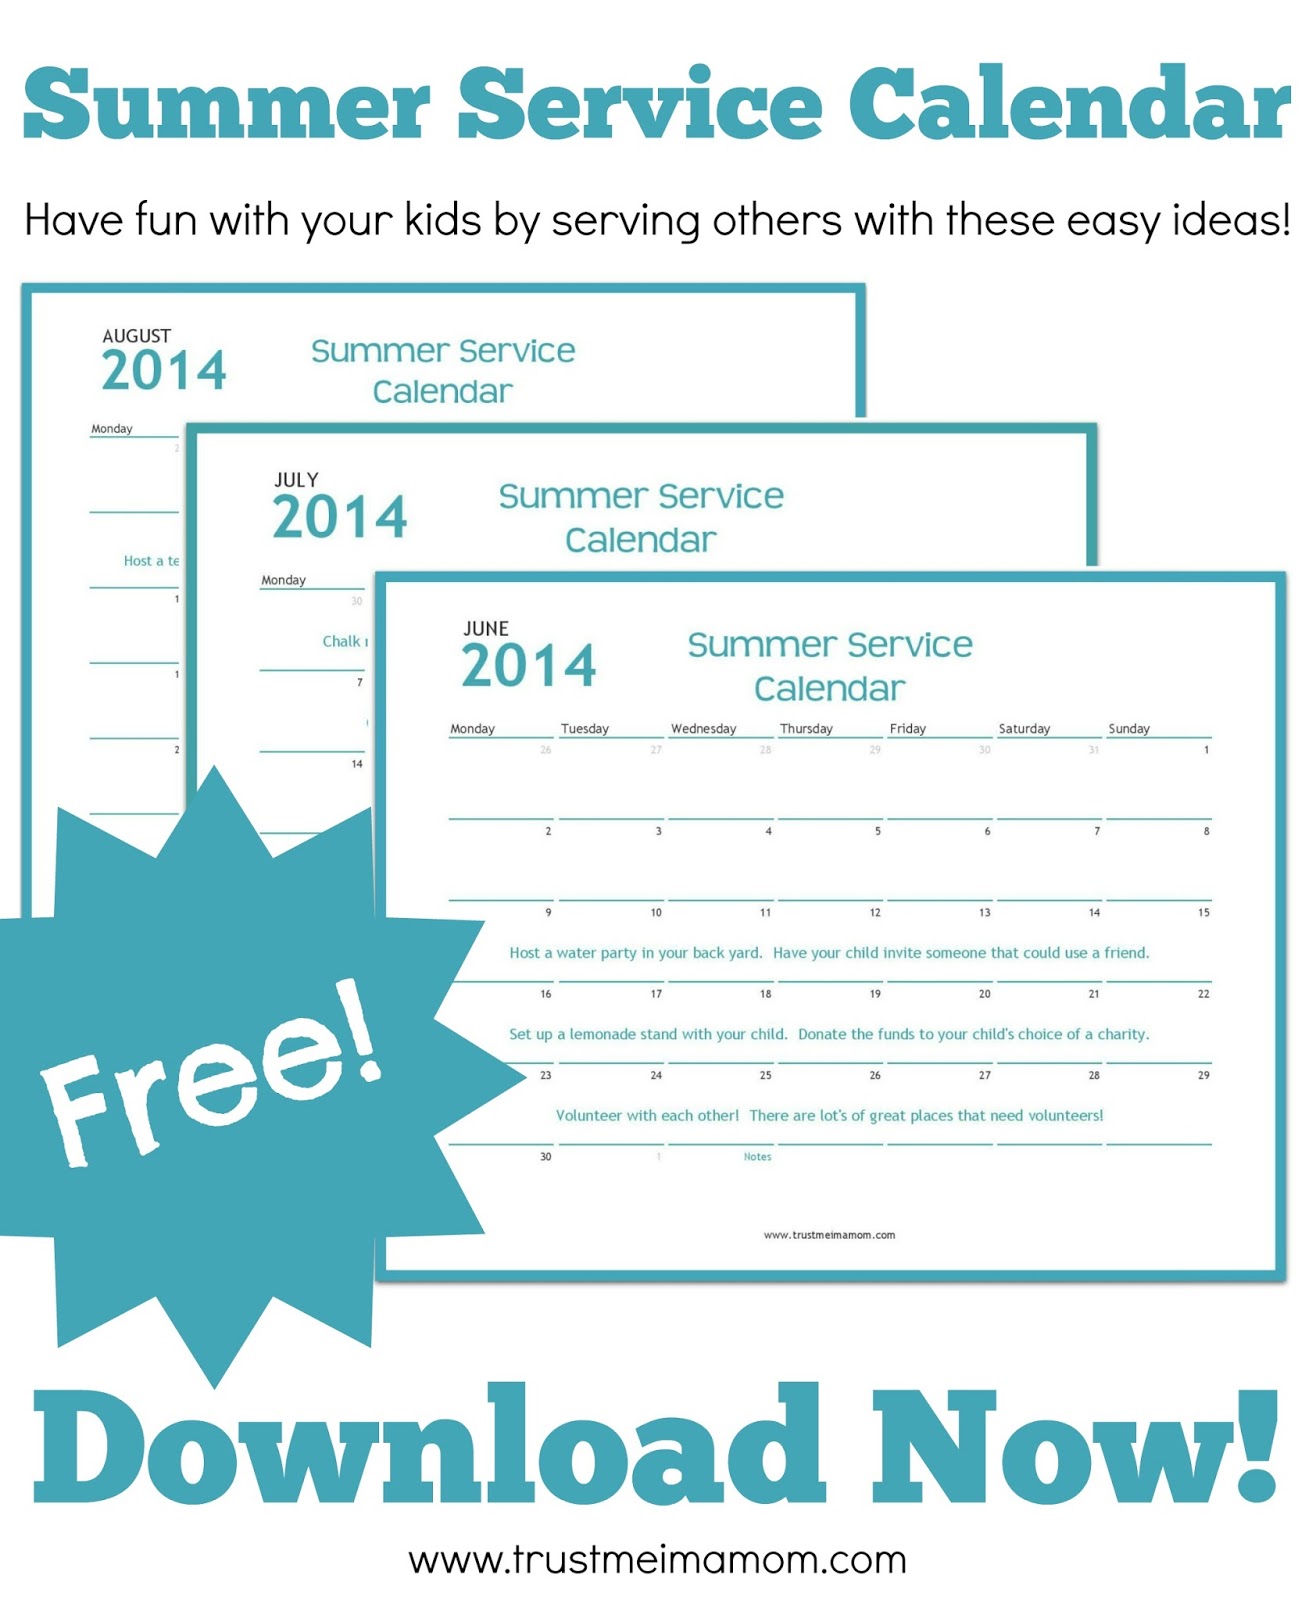 Download a free Summer Service Advent Calendar filled with easy ideas for how you can serve with your kids this Summer!